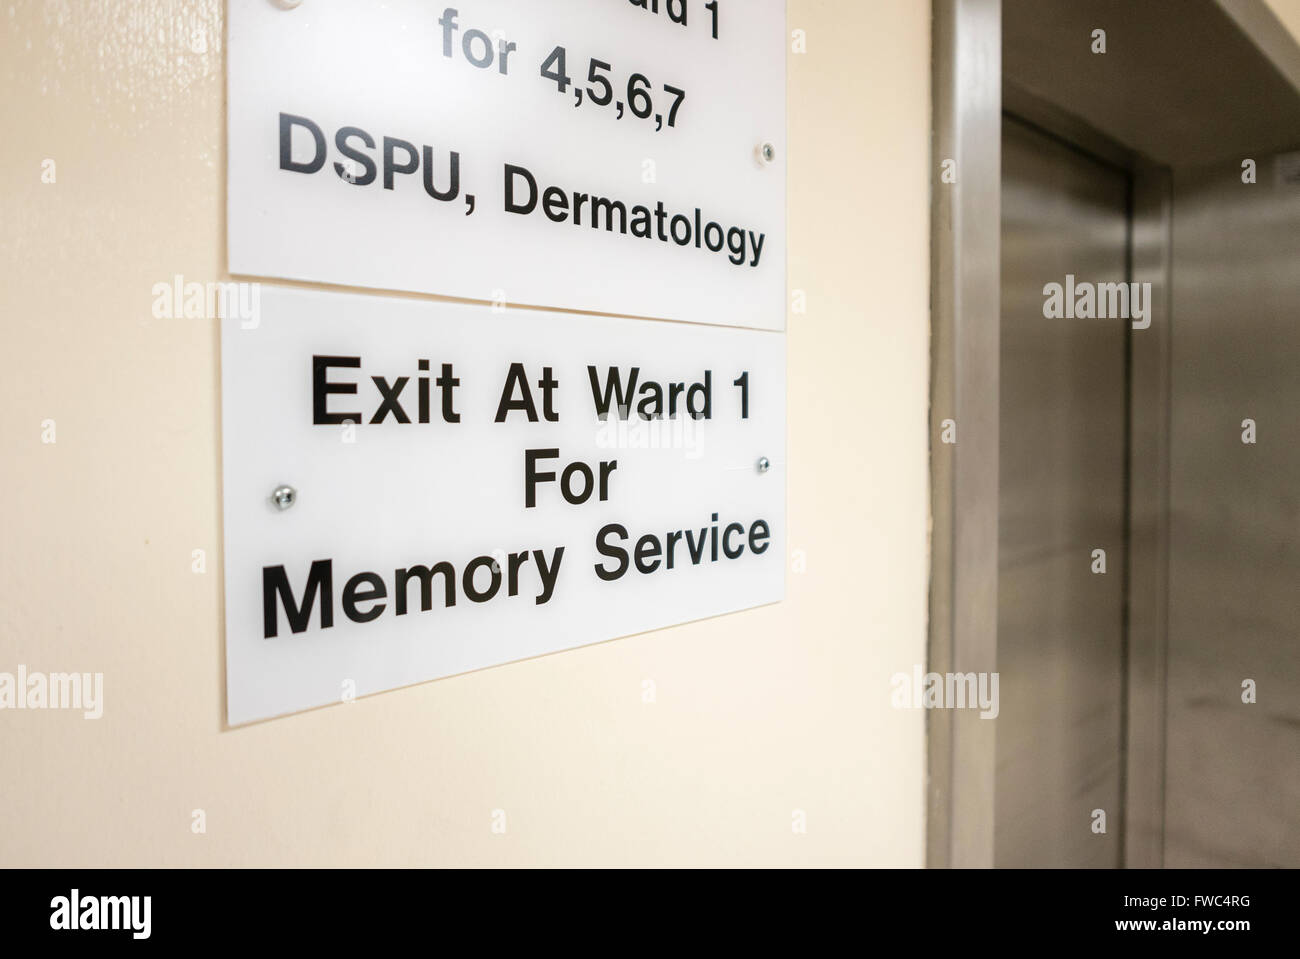 Sign at a lift in a hospital advising patients to exit at Ward 1 for the memory service. Stock Photo